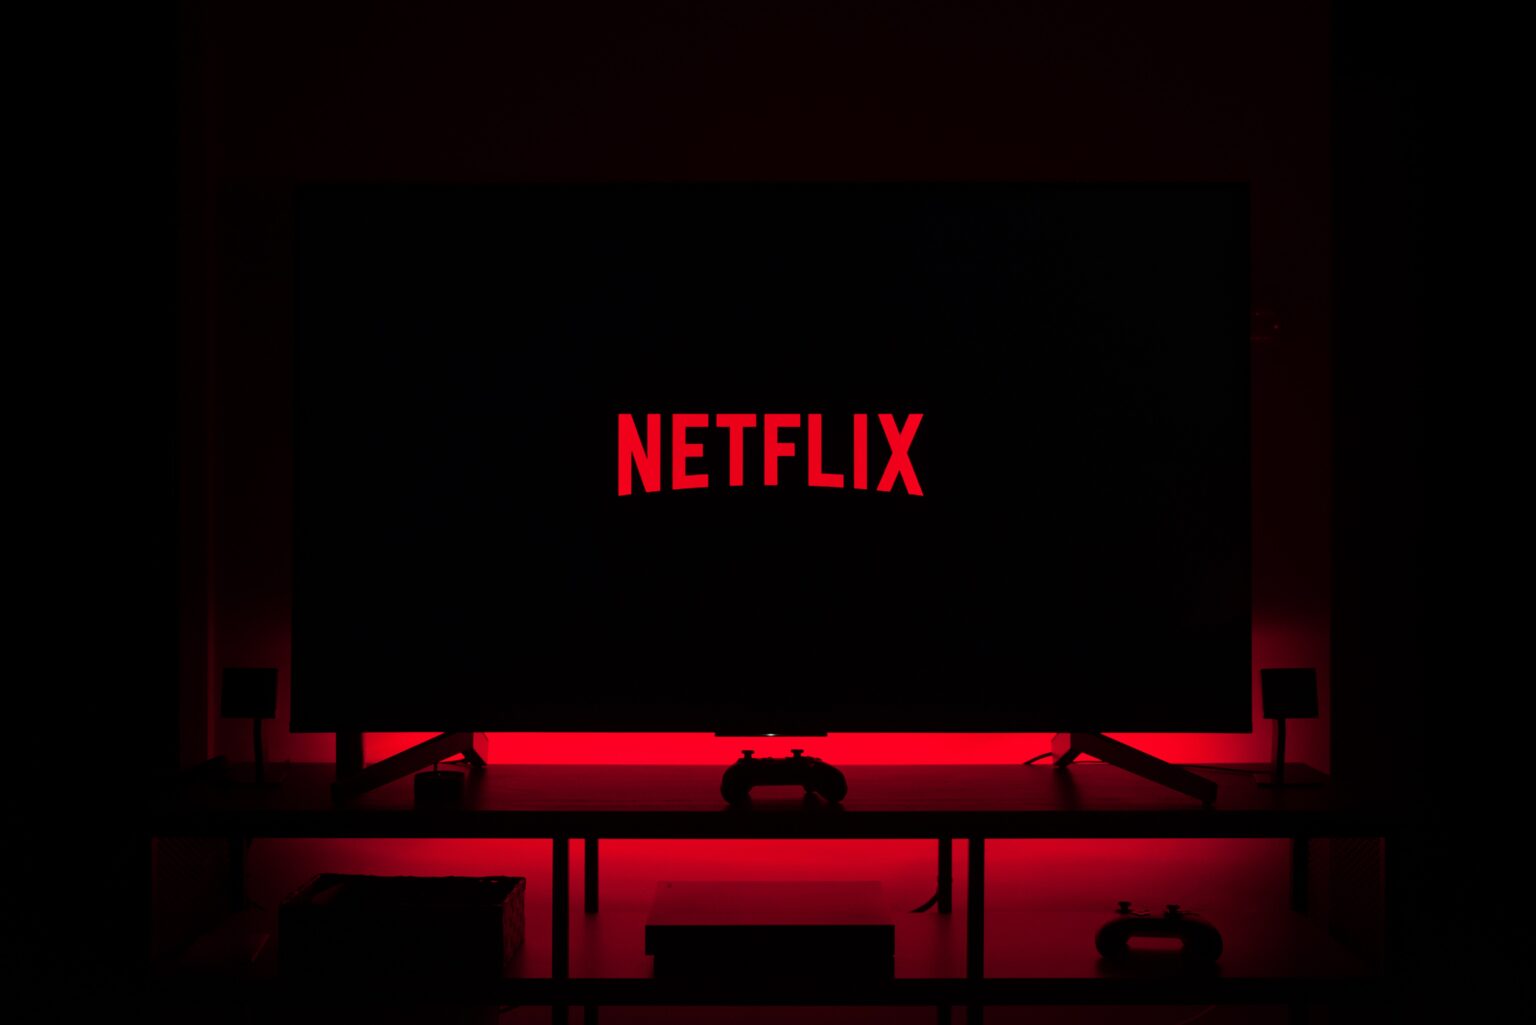 Arab nations request Netflix to remove “offensive” content.